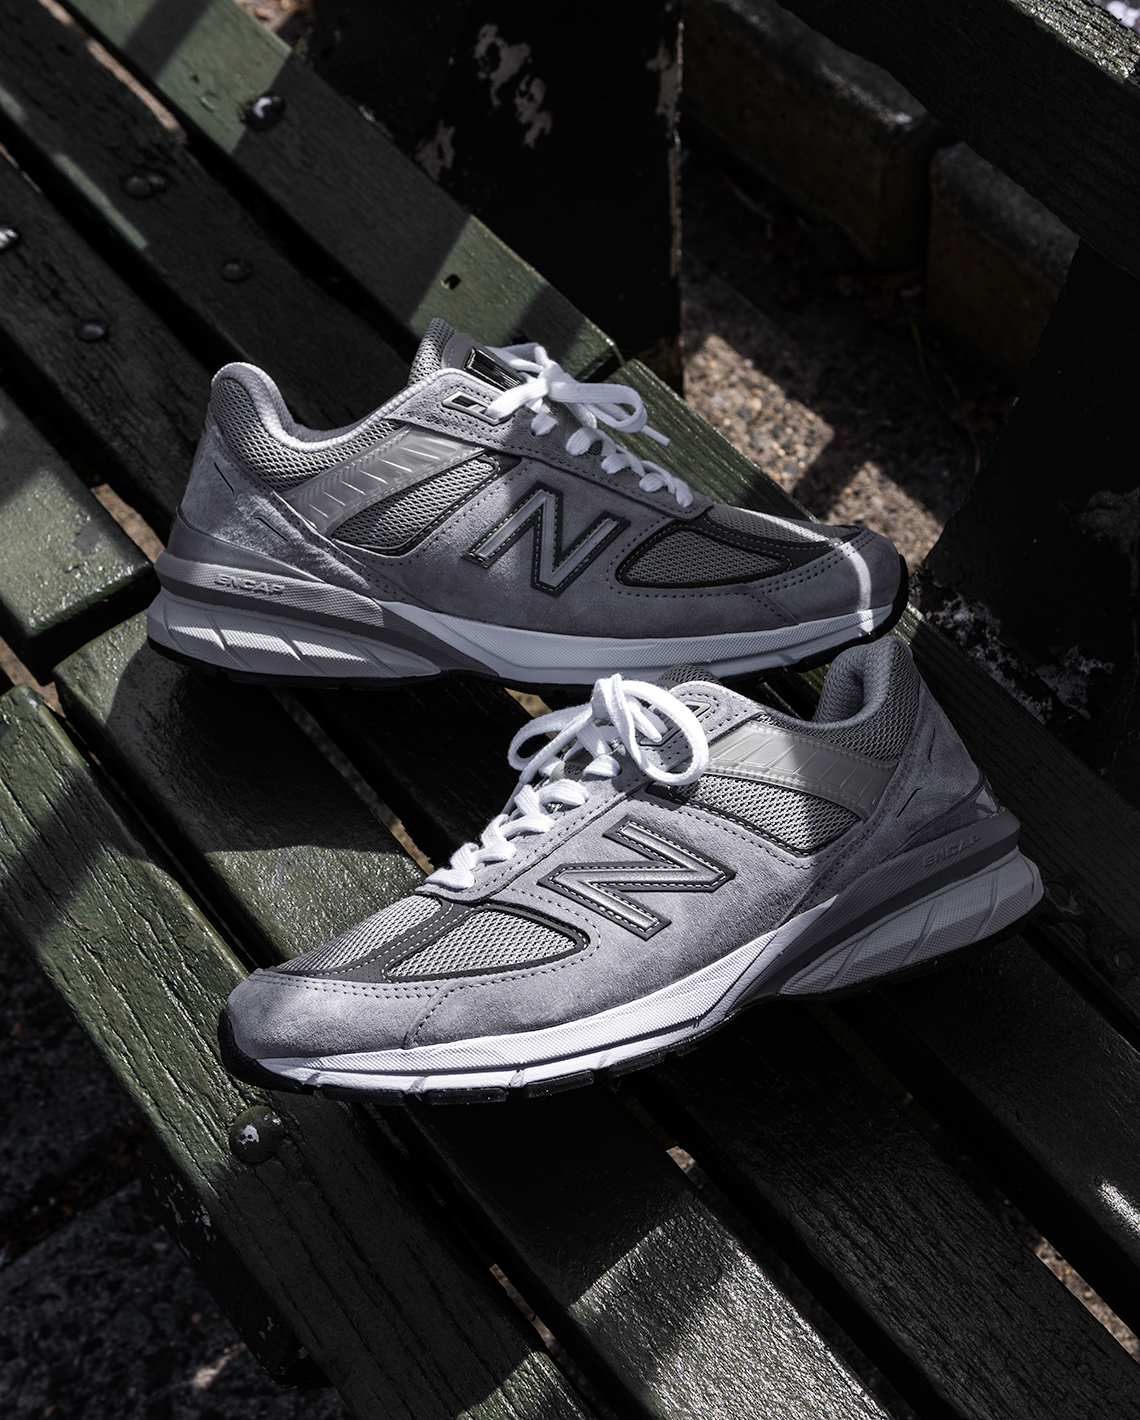 New Balance Shopping Guide March 2022 990v5 Gallery 1